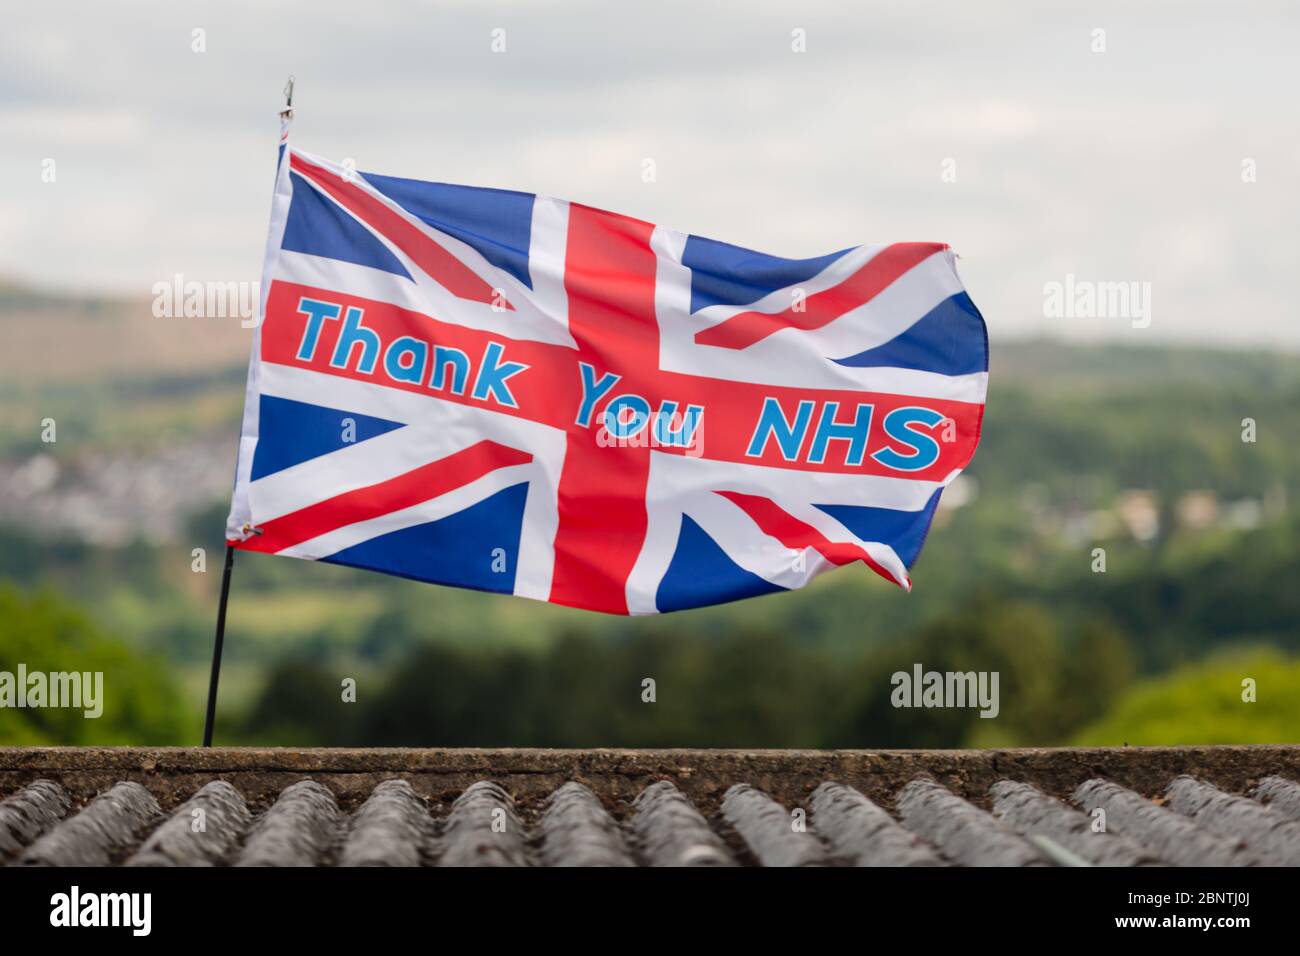 Newport, Wales, UK. 16th May, 2020. A union jack flag with the slogan thank you NHS, blows in the wind above a rooftop during the Covid-19 coronavirus pandemic in the UK. Credit: Tracey Paddison/Alamy Live News Stock Photo